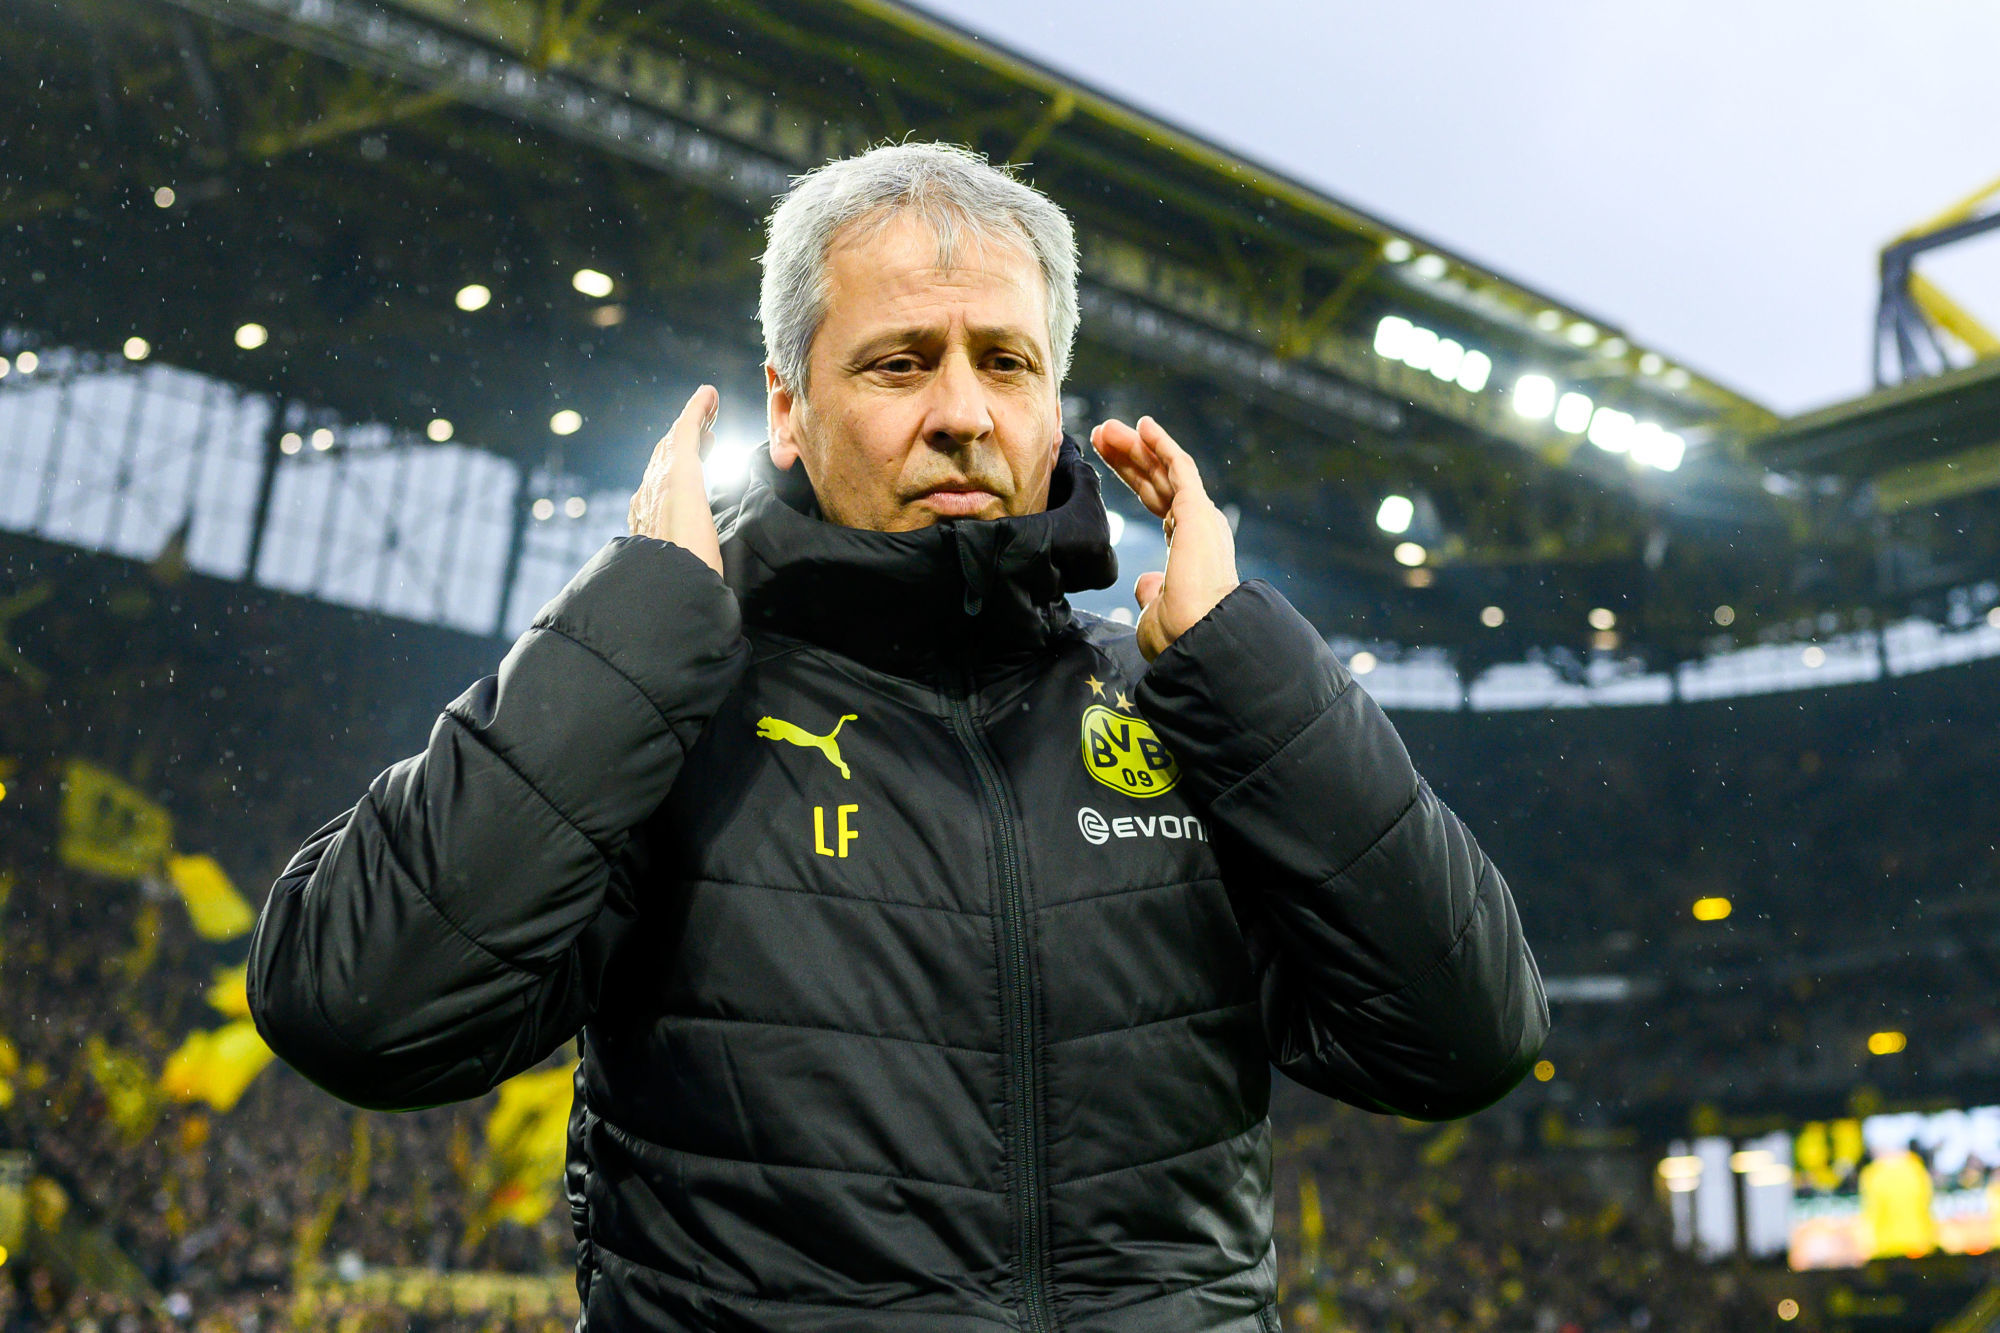 06 December 2019, North Rhine-Westphalia, Dortmund: Soccer: Bundesliga, Borussia Dortmund - Fortuna D¸sseldorf, 14th matchday, at Signal-Iduna-Park. Dortmund coach Lucien Favre enters the stadium. Photo: David Inderlied/dpa - IMPORTANT NOTE: In accordance with the requirements of the DFL Deutsche Fu?ball Liga or the DFB Deutscher Fu?ball-Bund, it is prohibited to use or have used photographs taken in the stadium and/or the match in the form of sequence images and/or video-like photo sequences. 

Photo by Icon Sport - Lucien FAVRE - Signal Iduna Park - Dortmund (Allemagne)